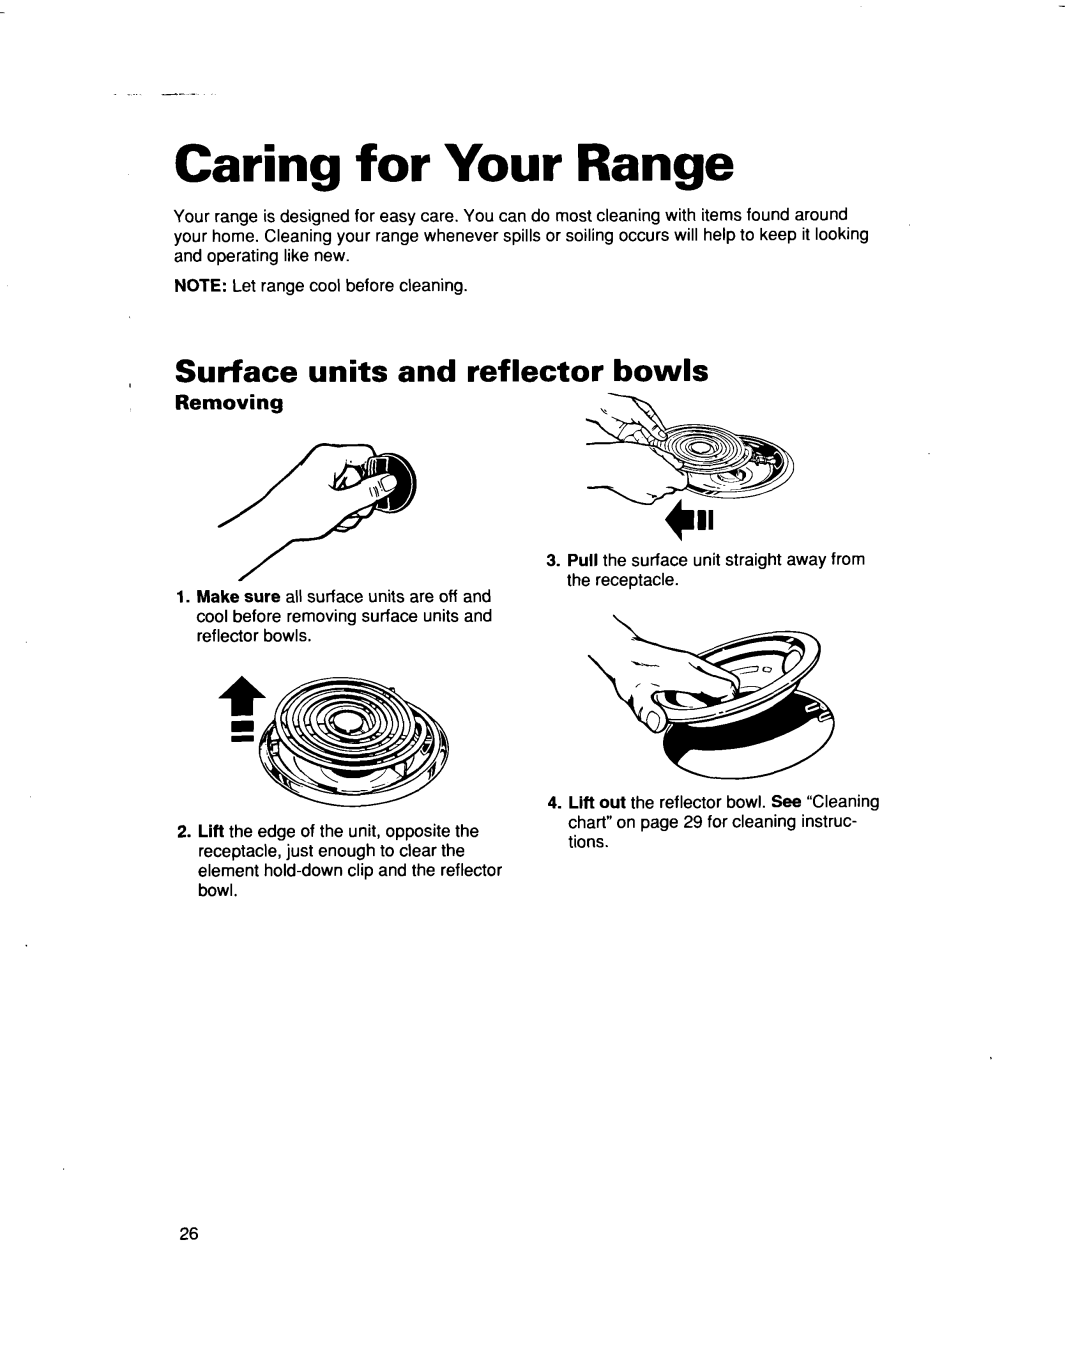 Whirlpool RF367PXD warranty Caring for Your Range, Surface units and reflector bowls, I.\$ 